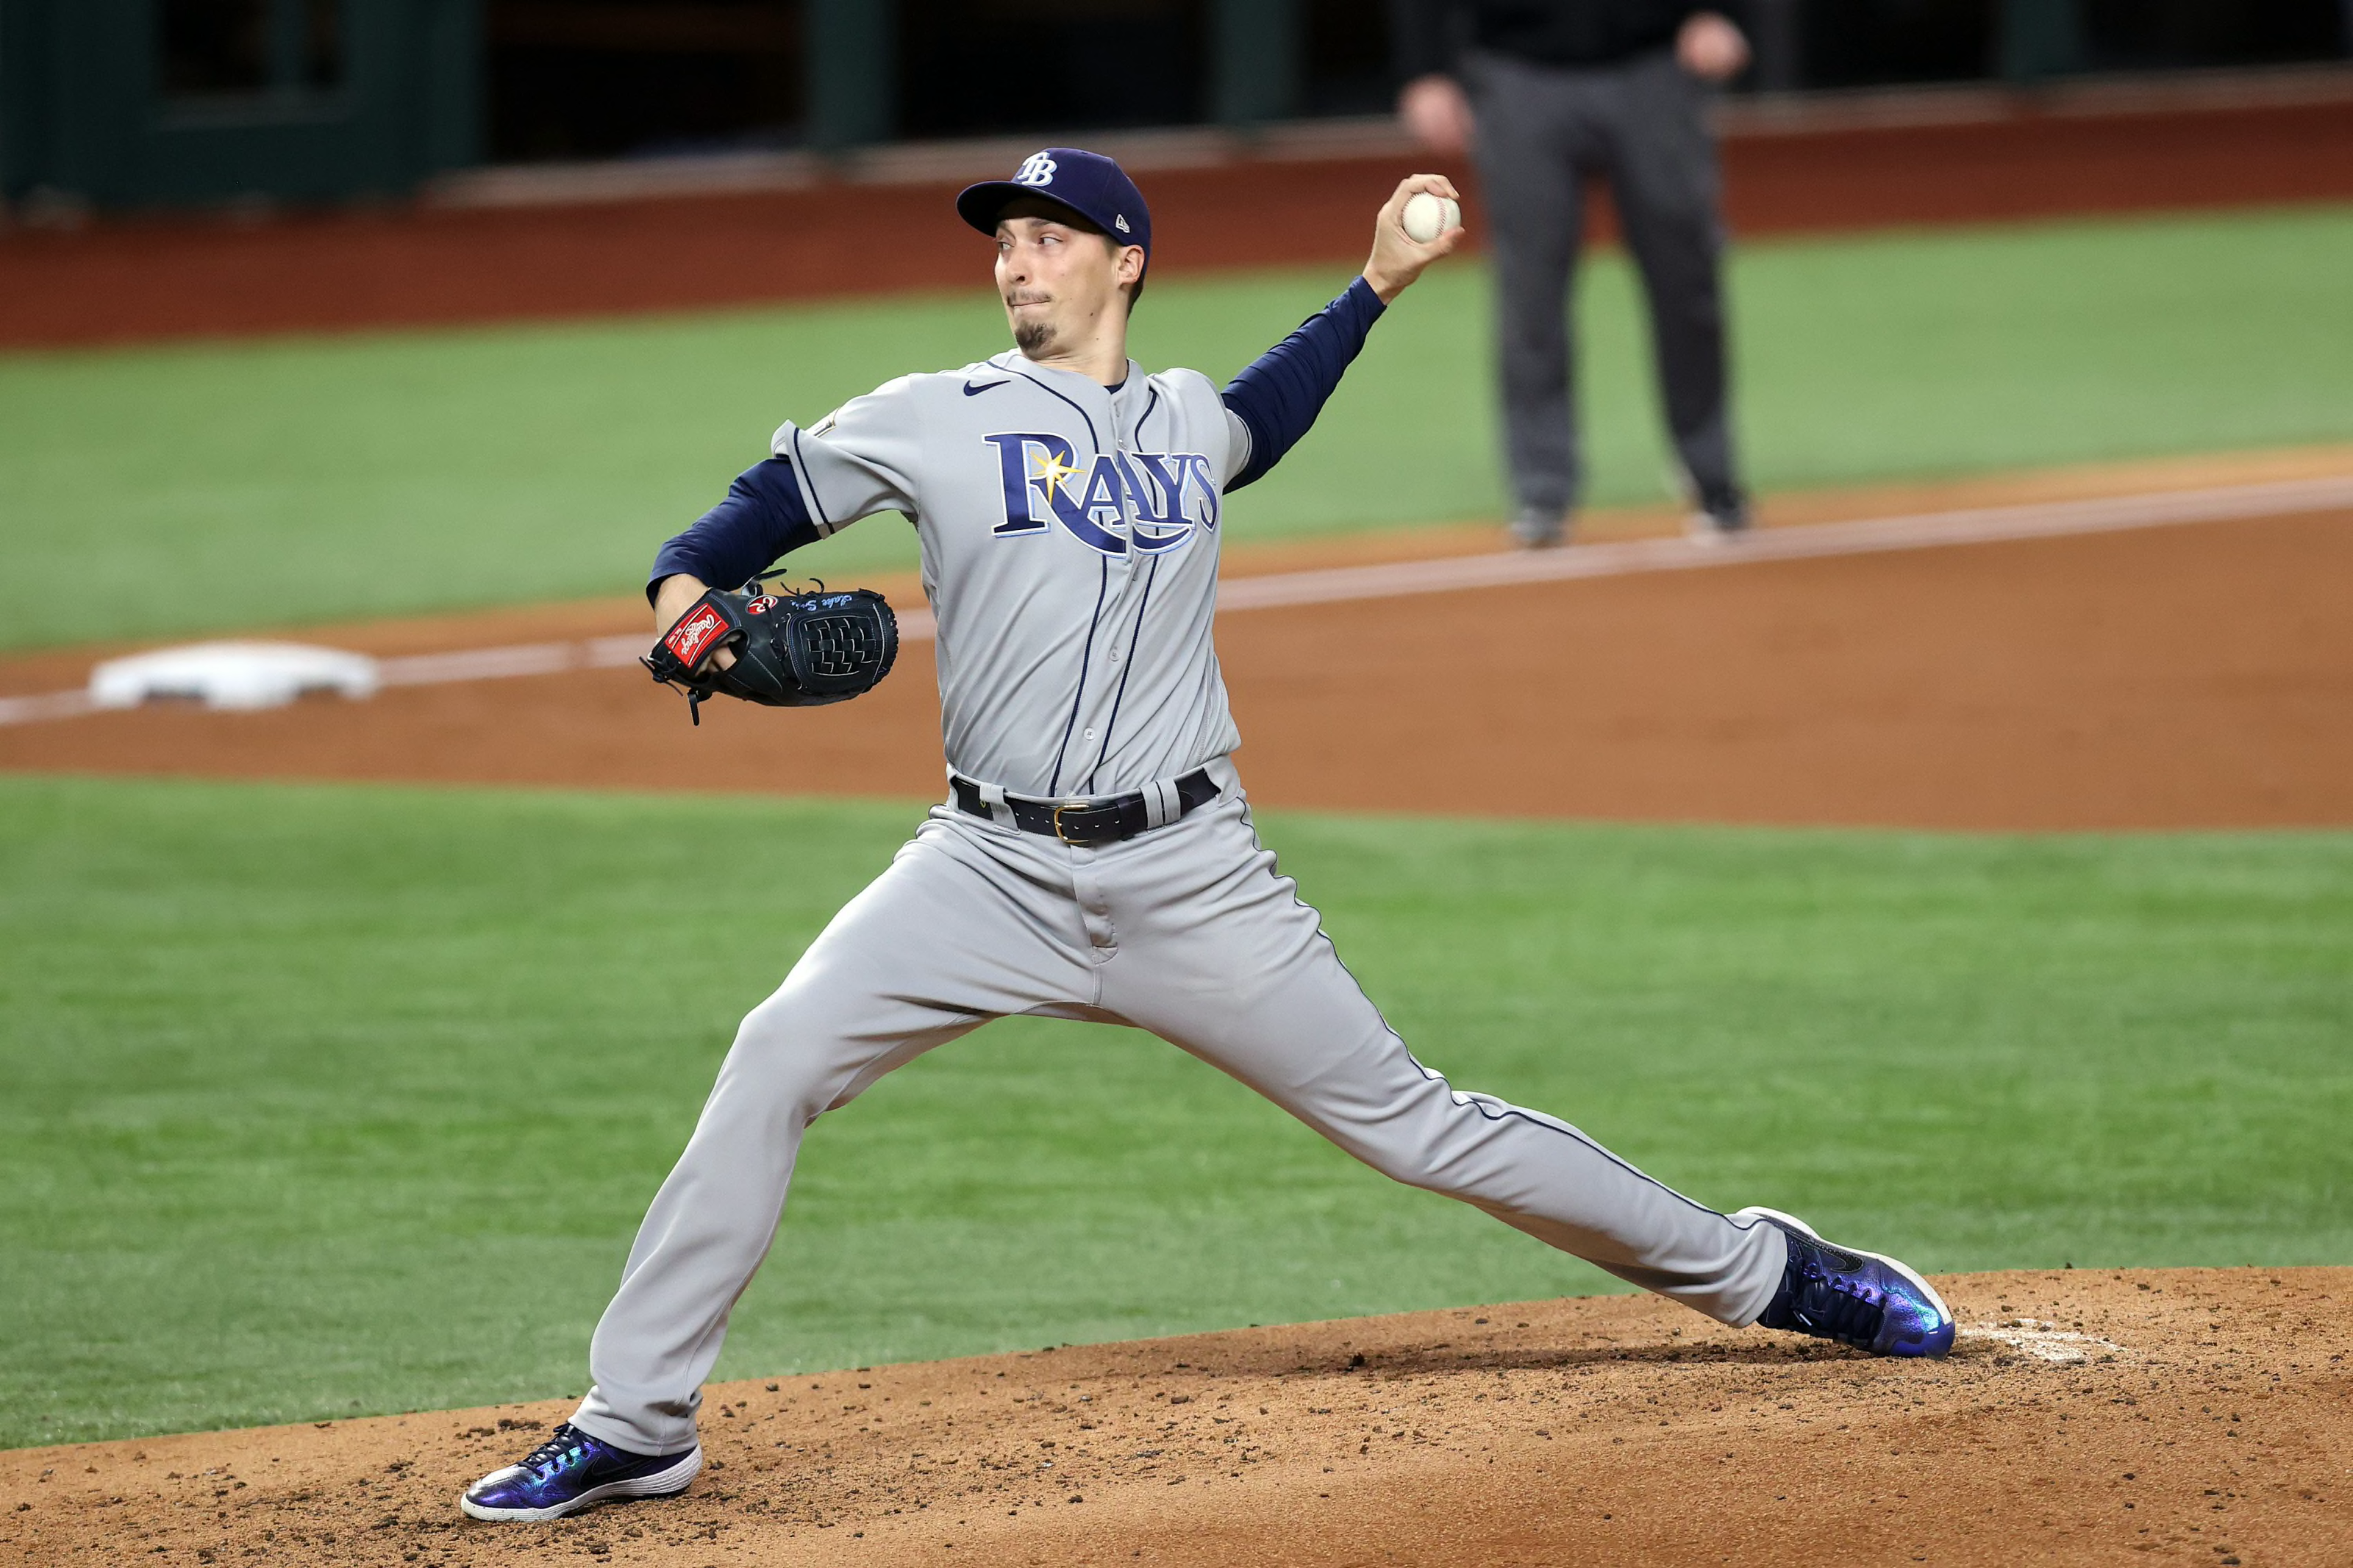 Mariners Snell of the Rays represented Seattle well in the World Series